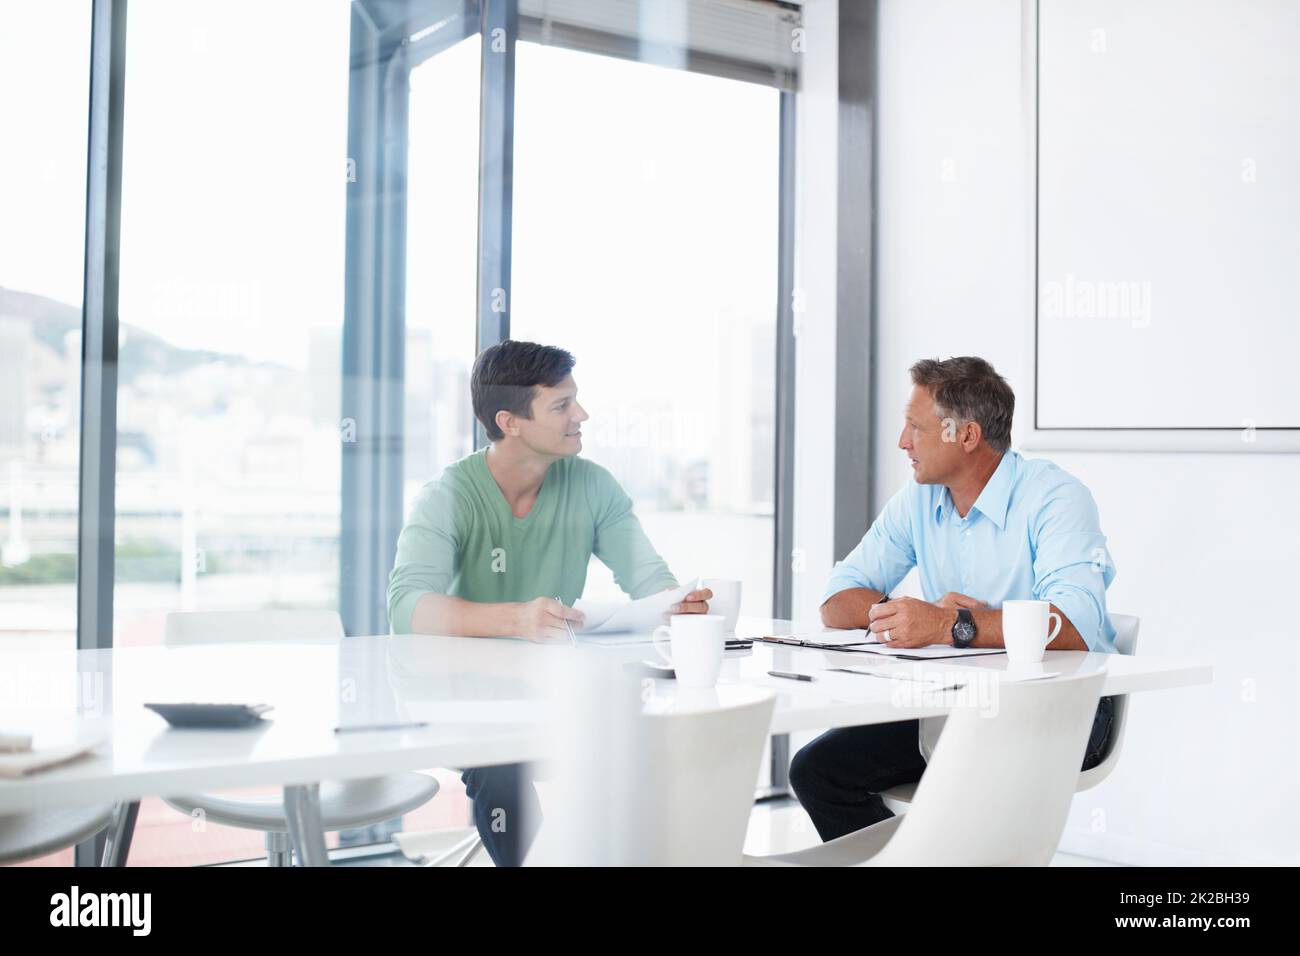 Making the pitch. A young advertising executive pitching an idea to his boss. Stock Photo